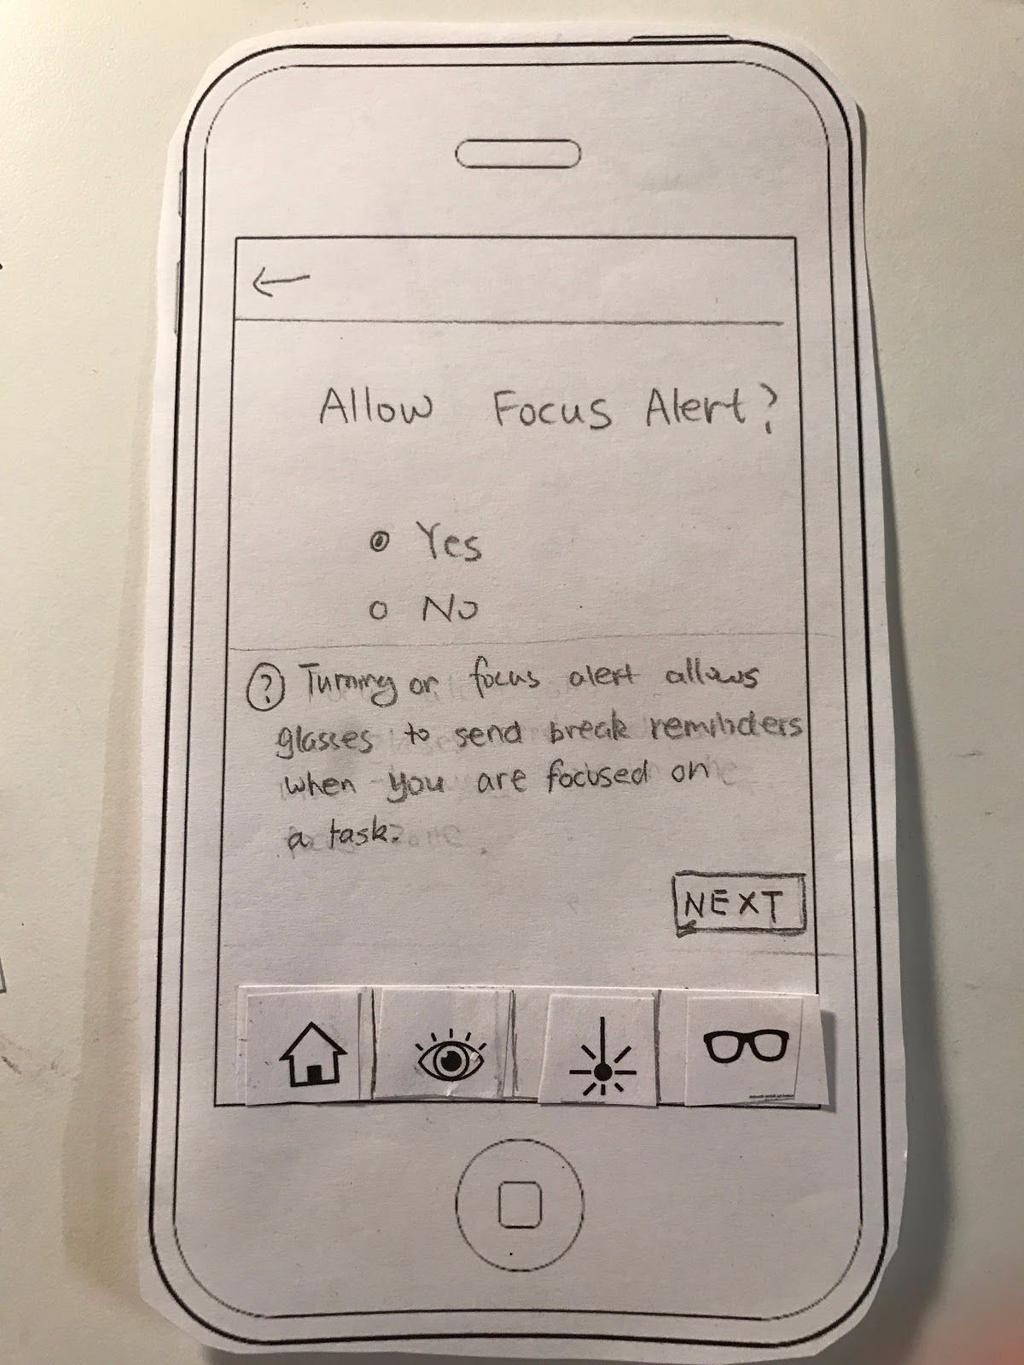 The user can set whether focus alert is allowed.